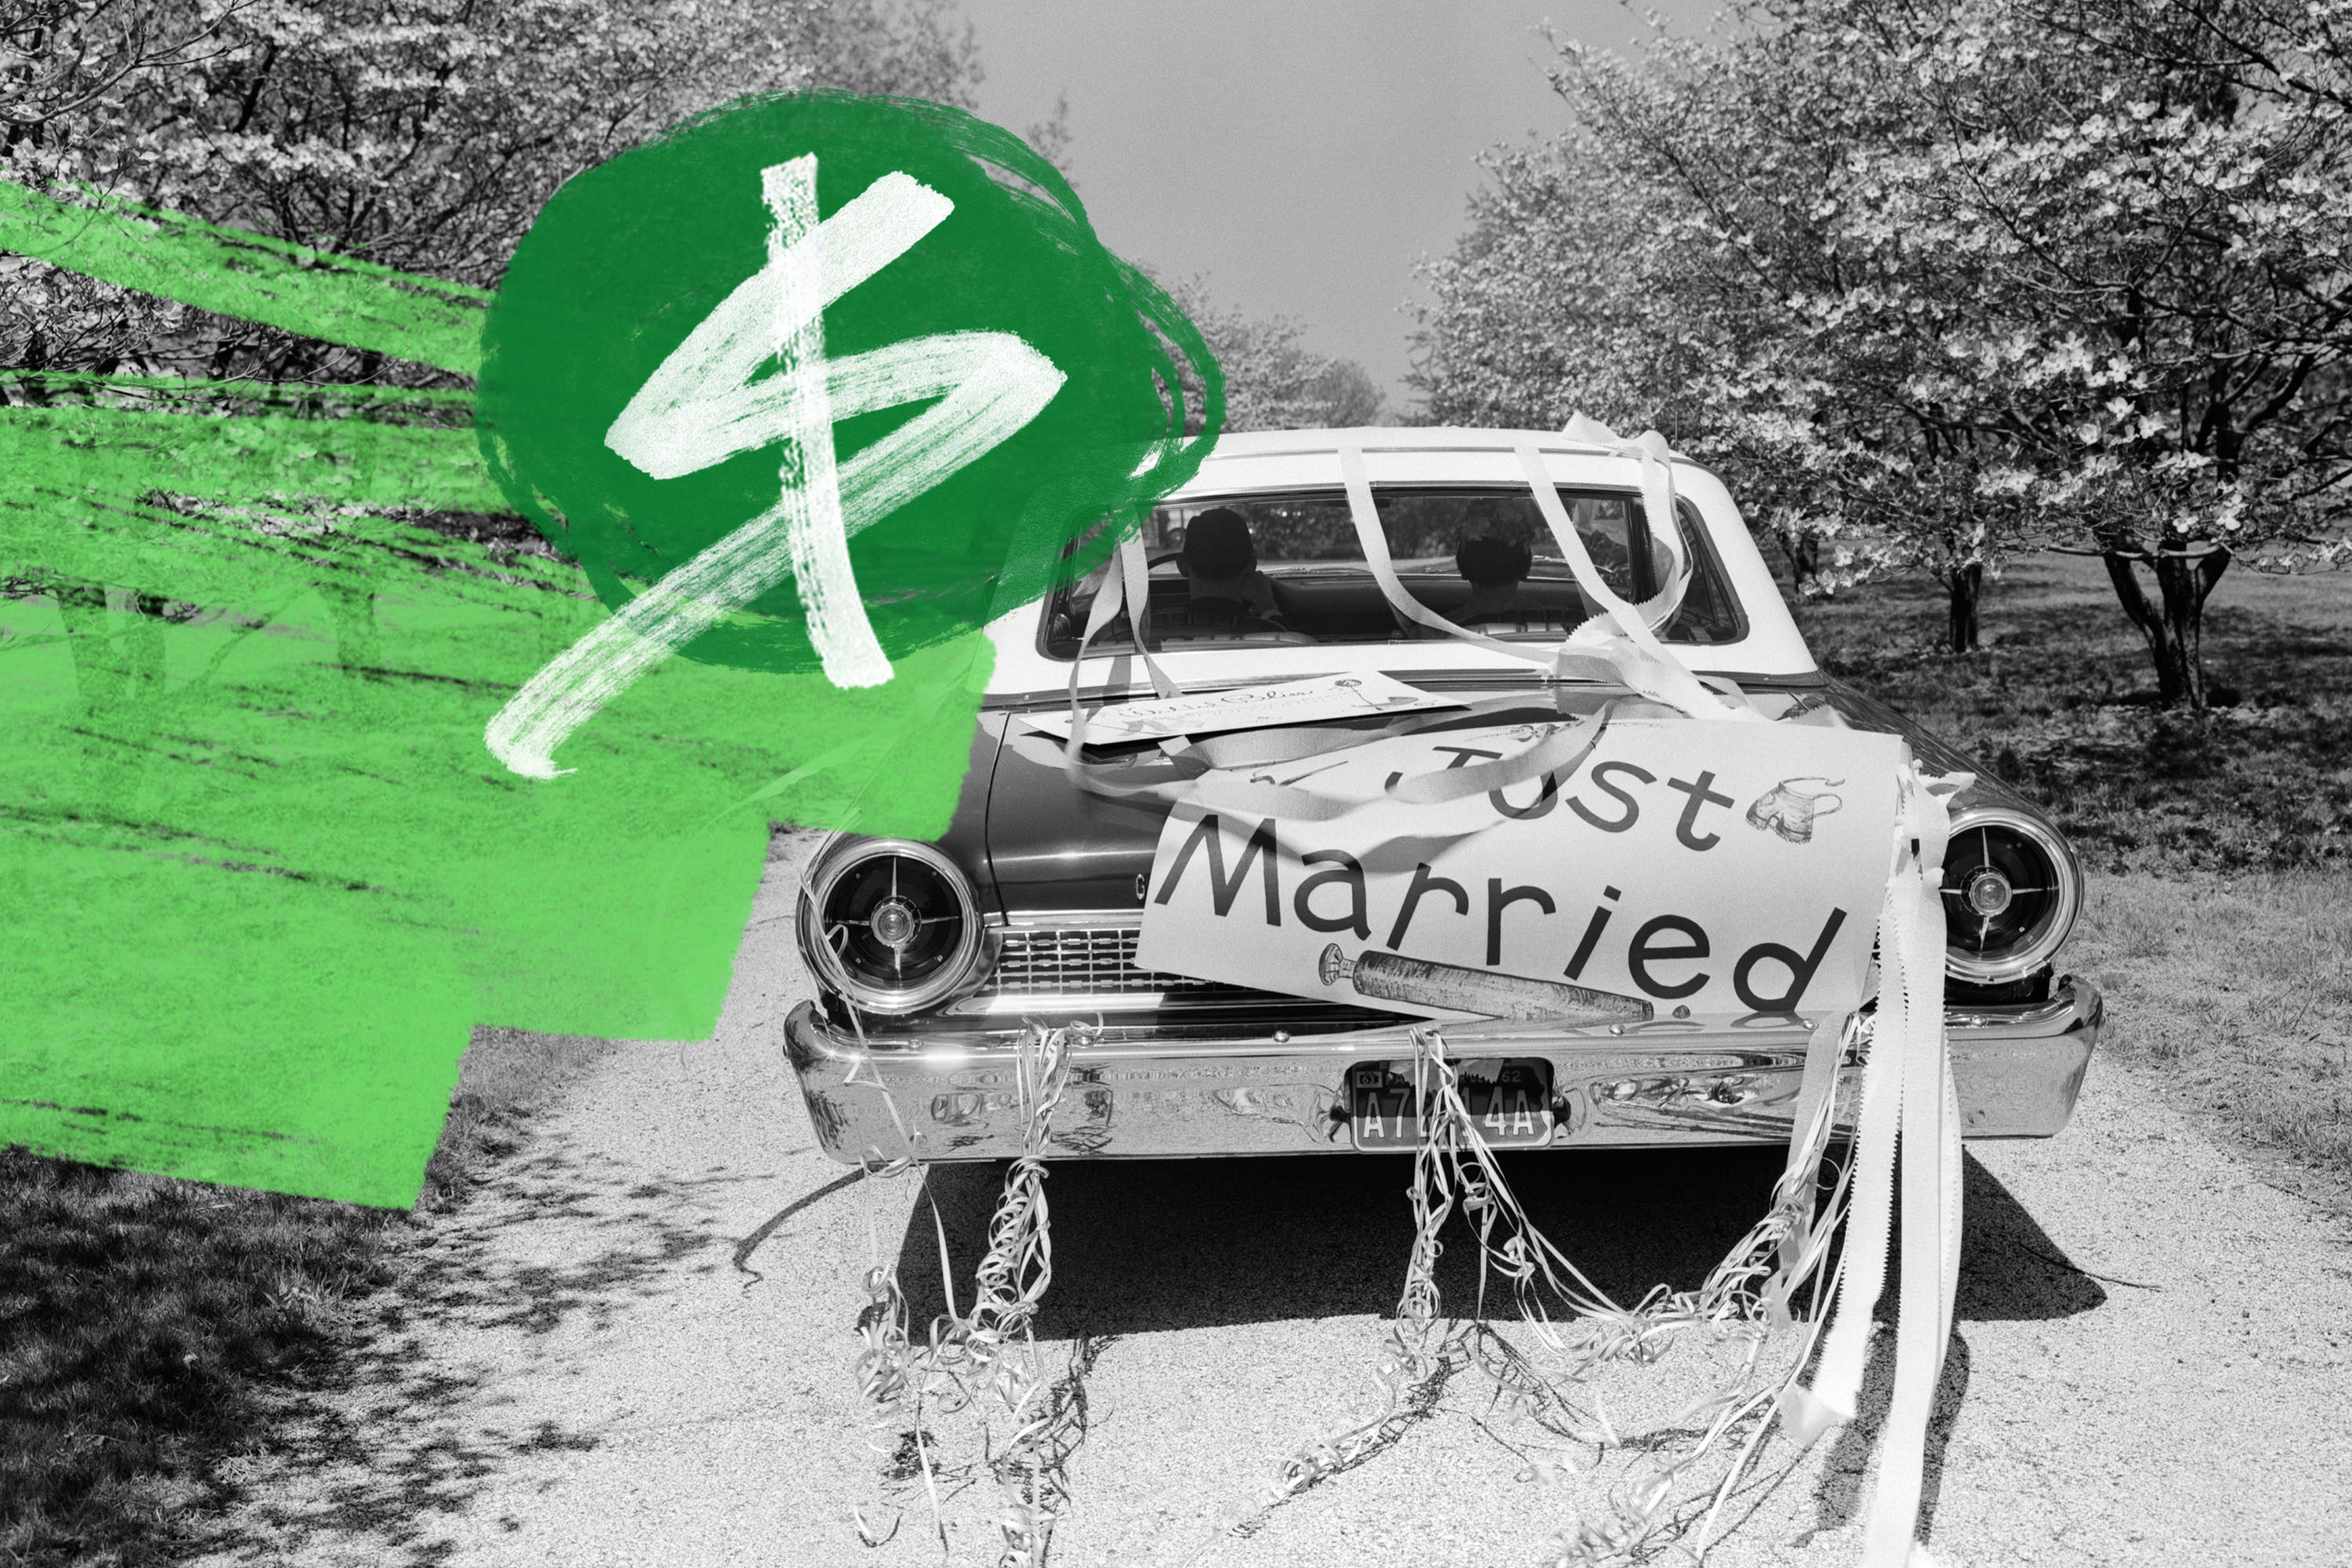 A picture of a car that says “just married” on the back with a dollar sign.